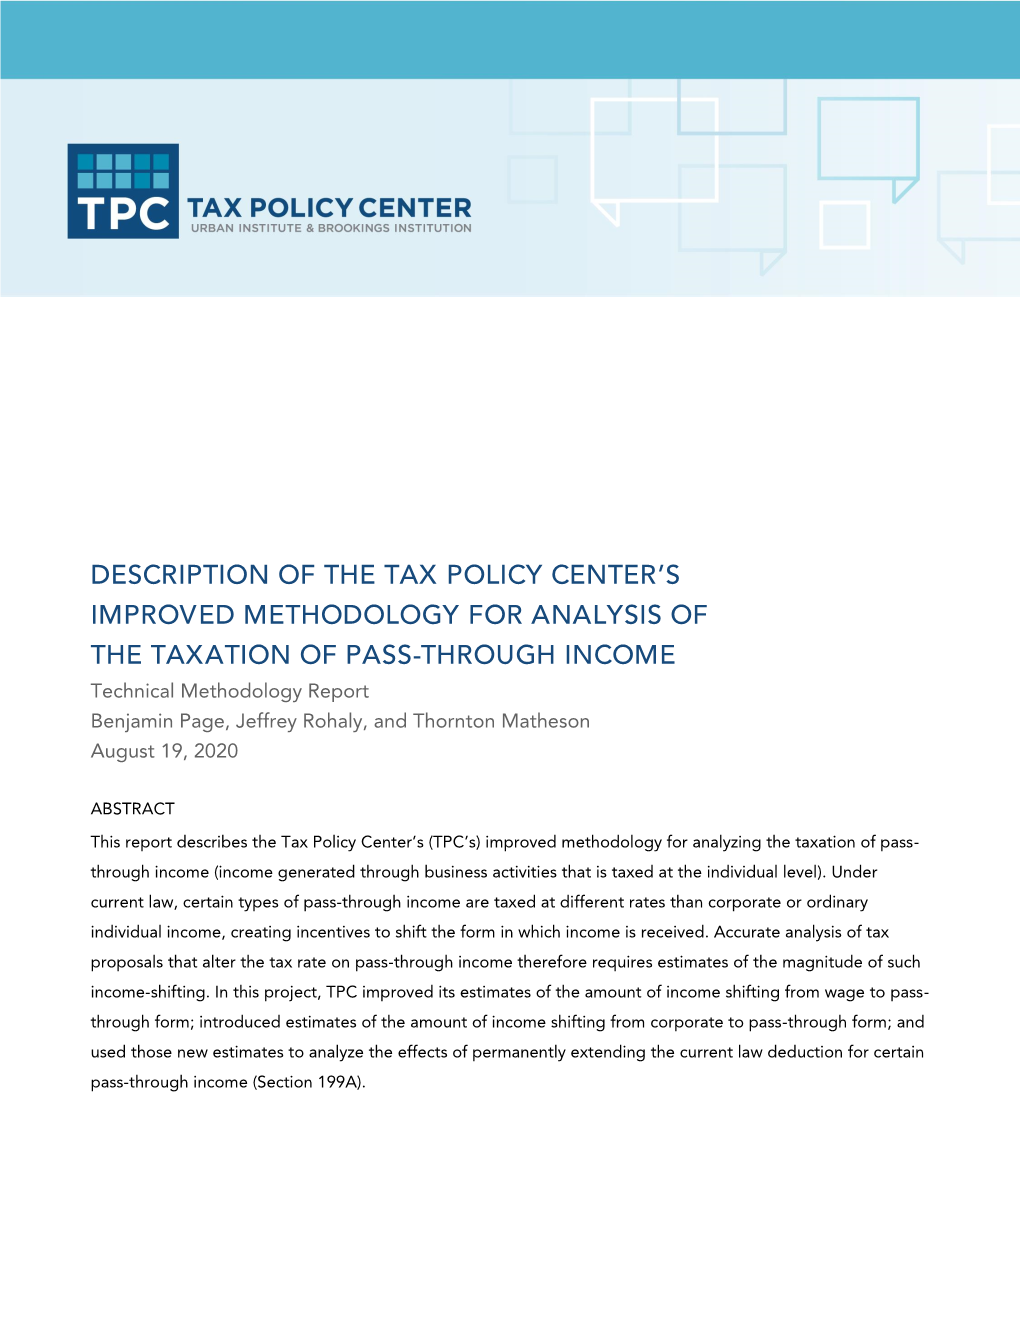 Description of the Tax Policy Center's Improved